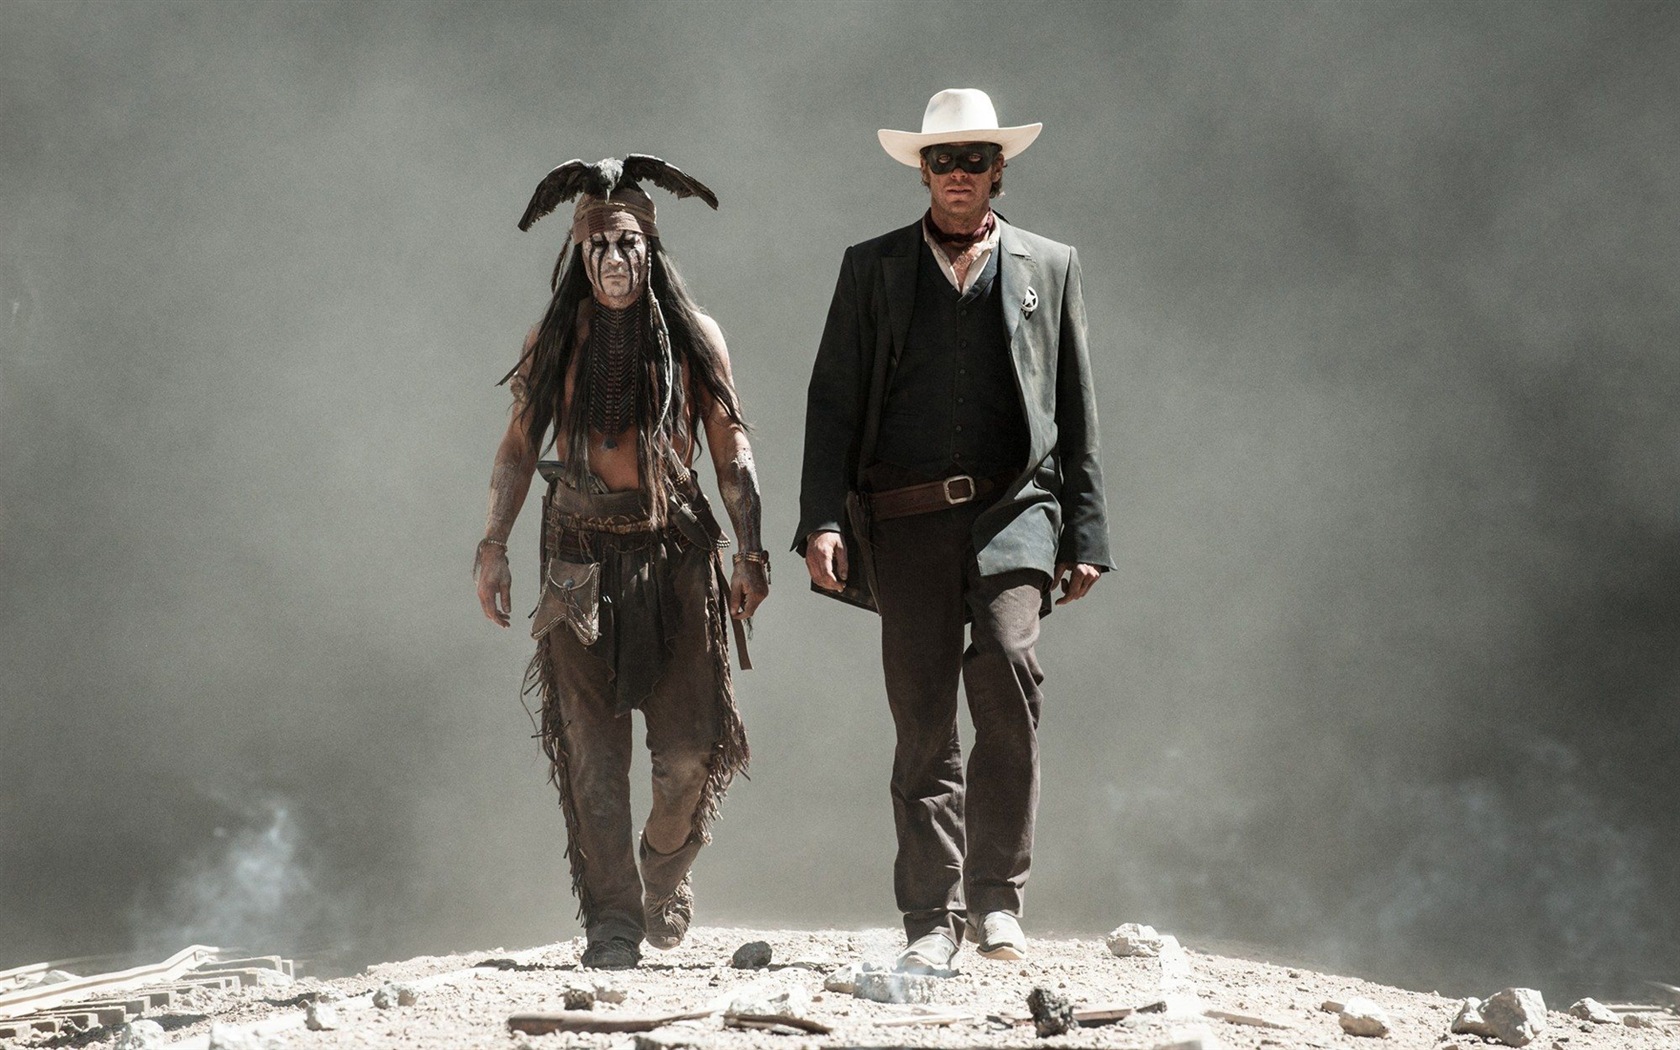 The Lone Ranger HD movie wallpapers #4 - 1680x1050